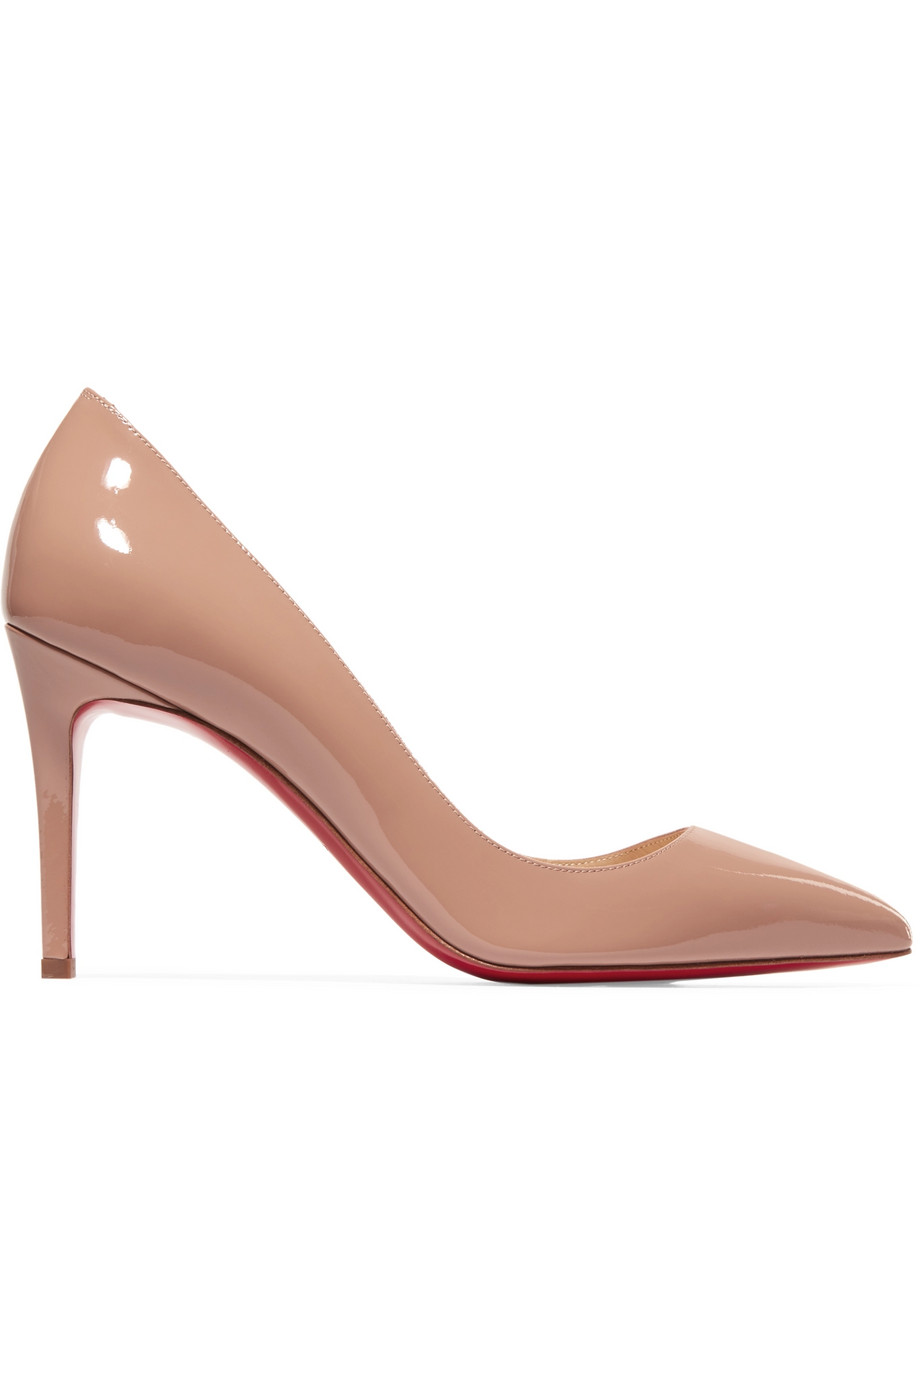 christian louboutin nude pigalle